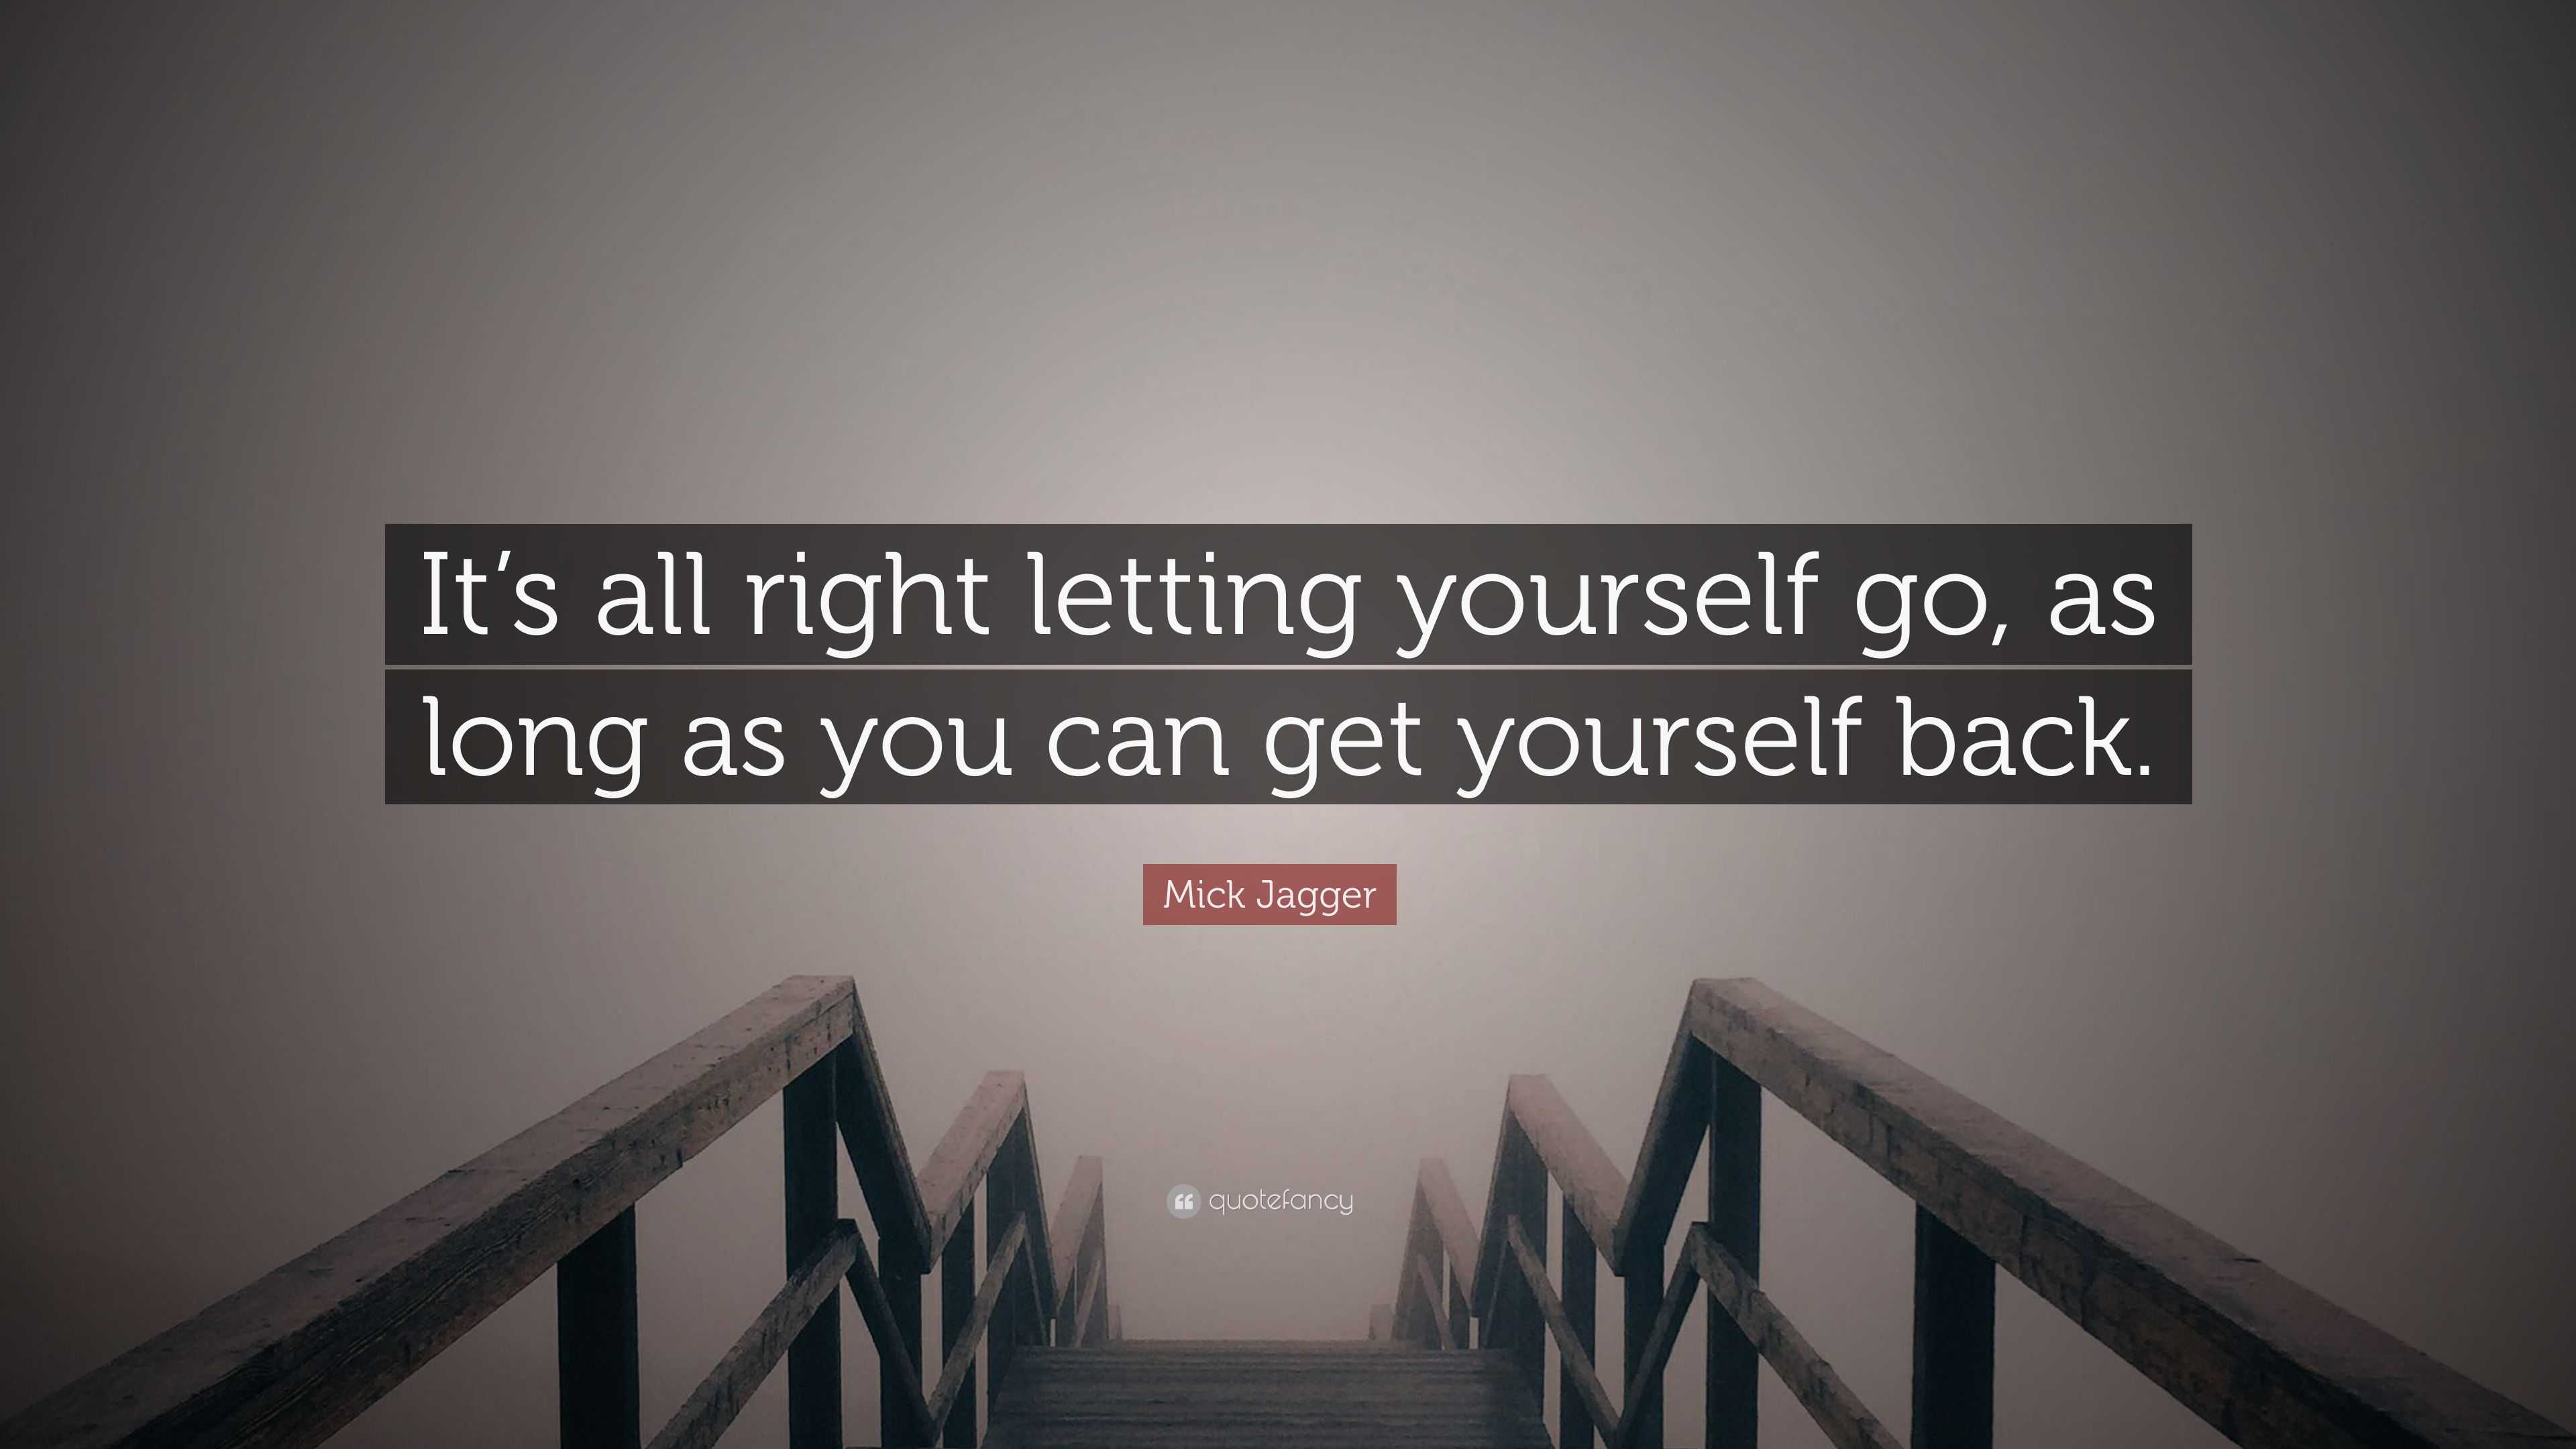 Mick Jagger Quote: “It’s all right letting yourself go, as long as you ...